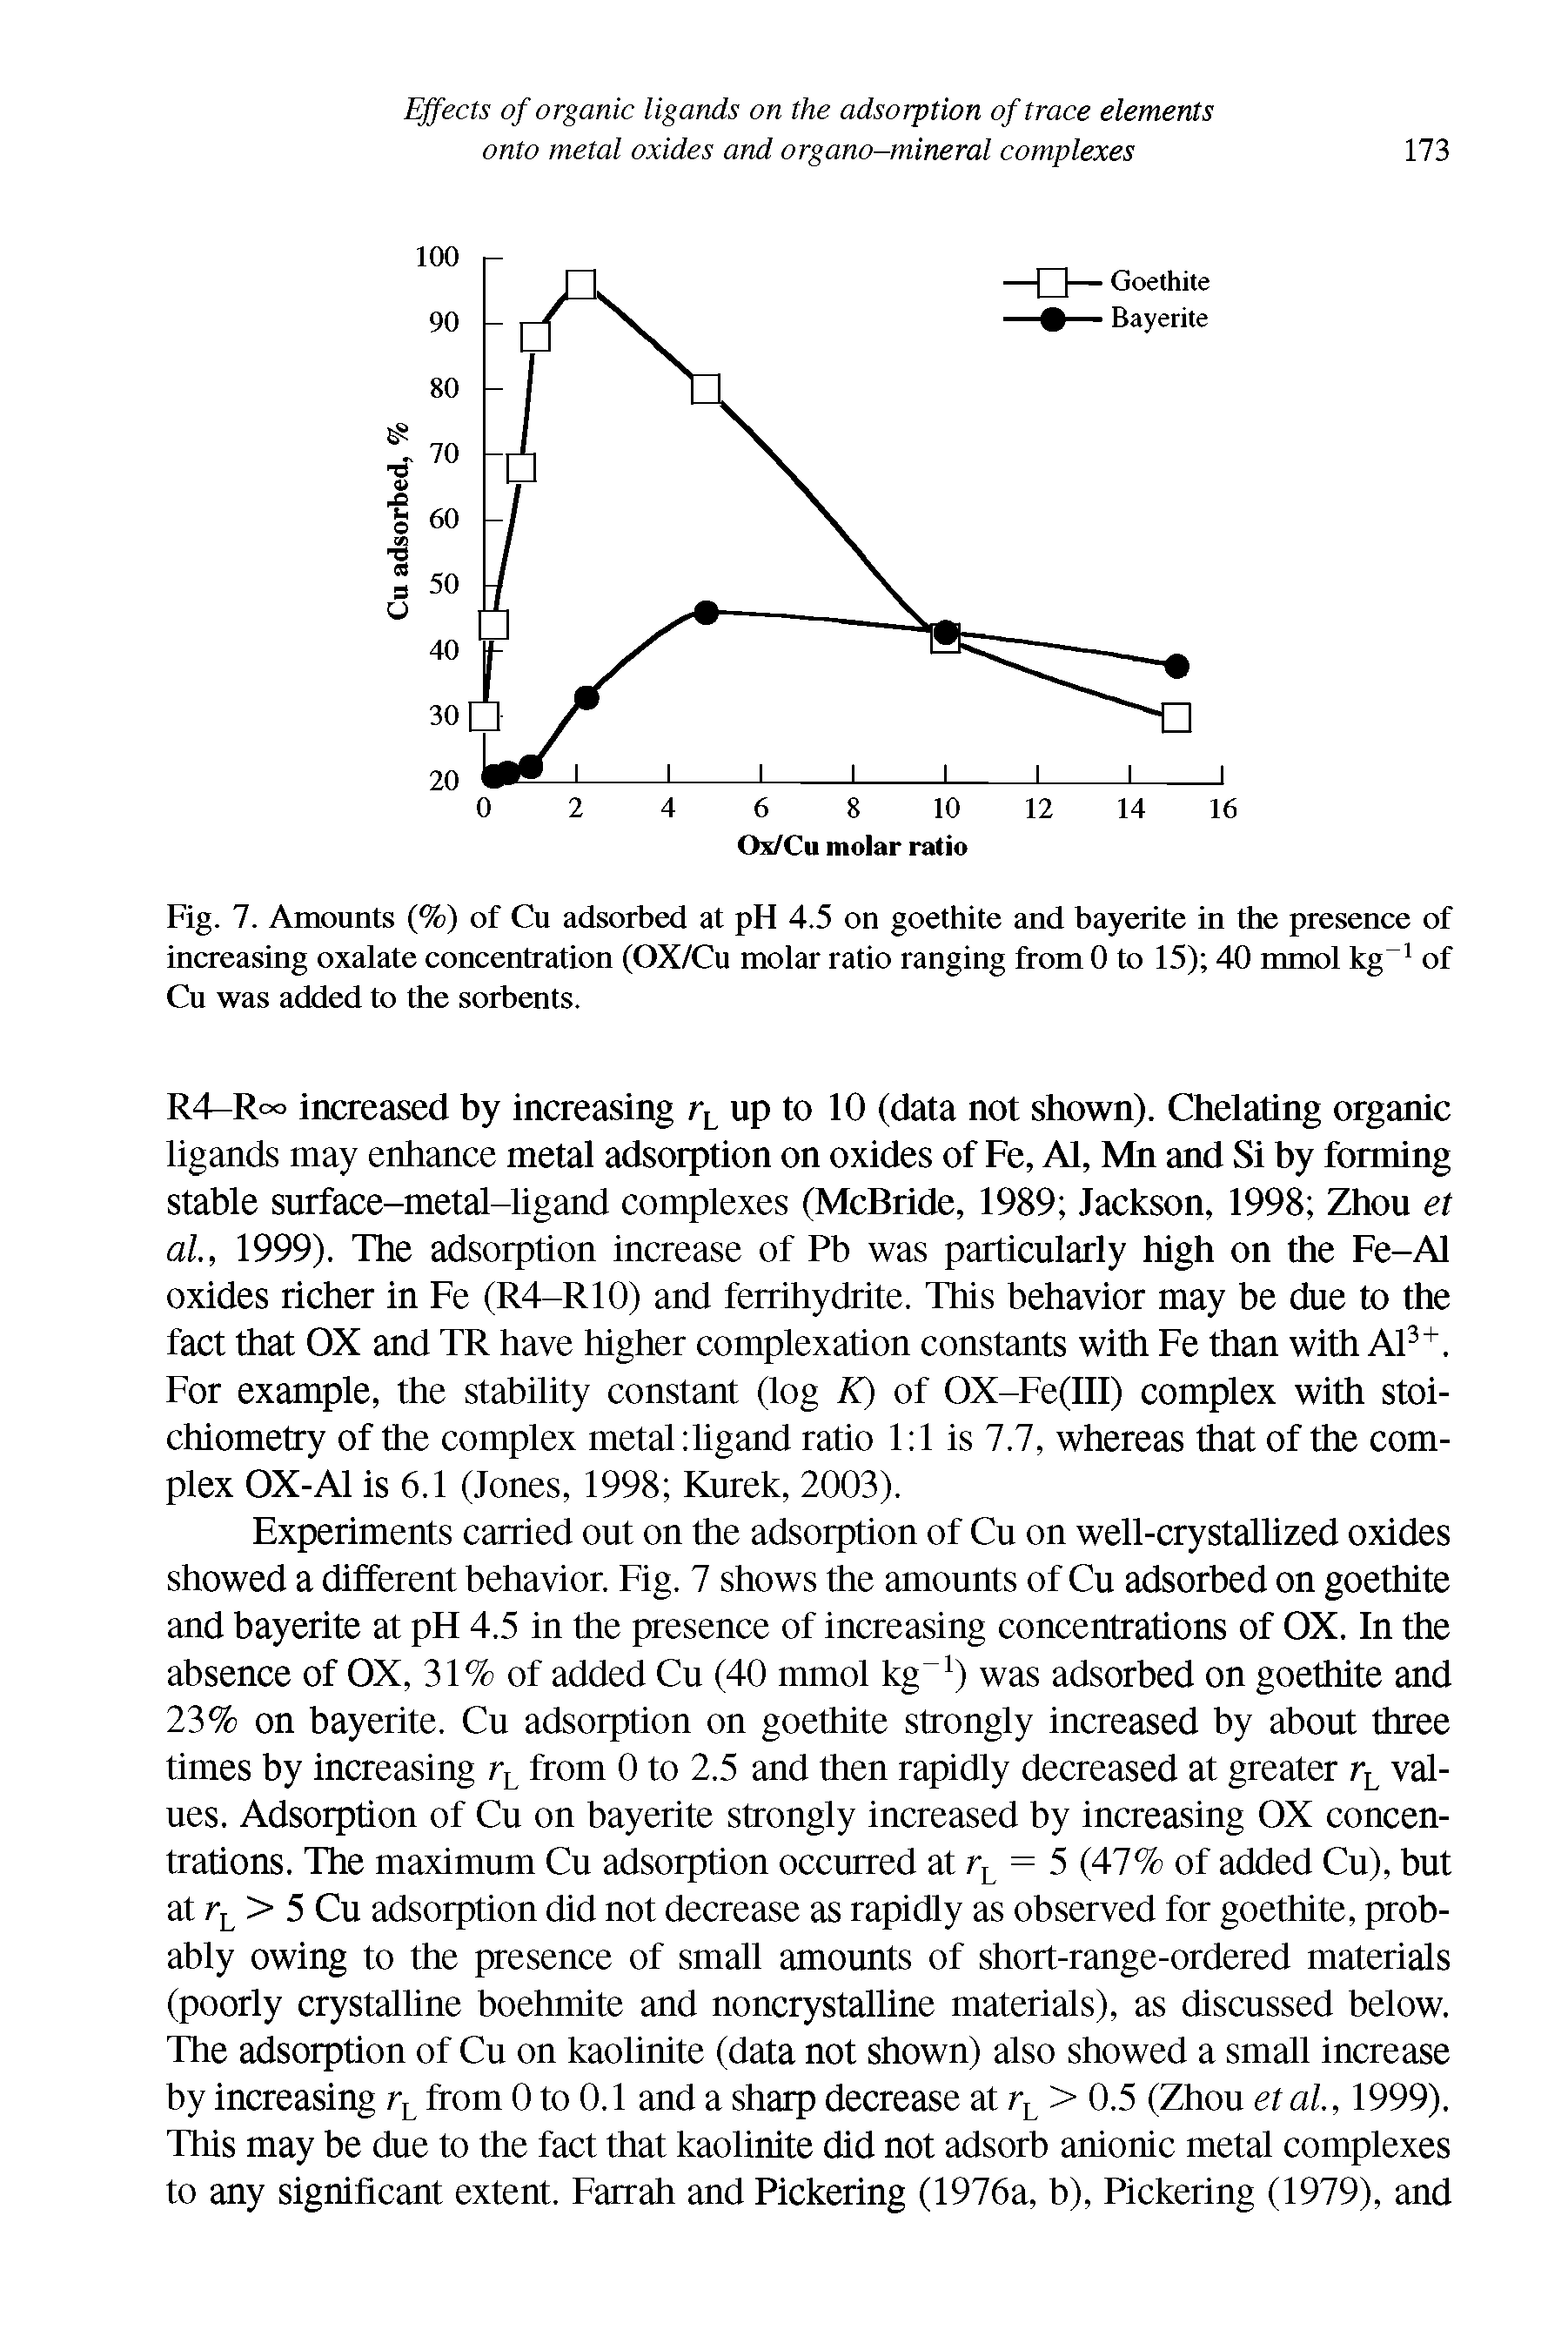 Fig. 7. Amounts (%) of Cu adsorbed at pH 4.5 on goethite and bayerite in the presence of increasing oxalate concentration (OX/Cu molar ratio ranging from 0 to 15) 40 mmol kg of Cu was added to the sorbents.